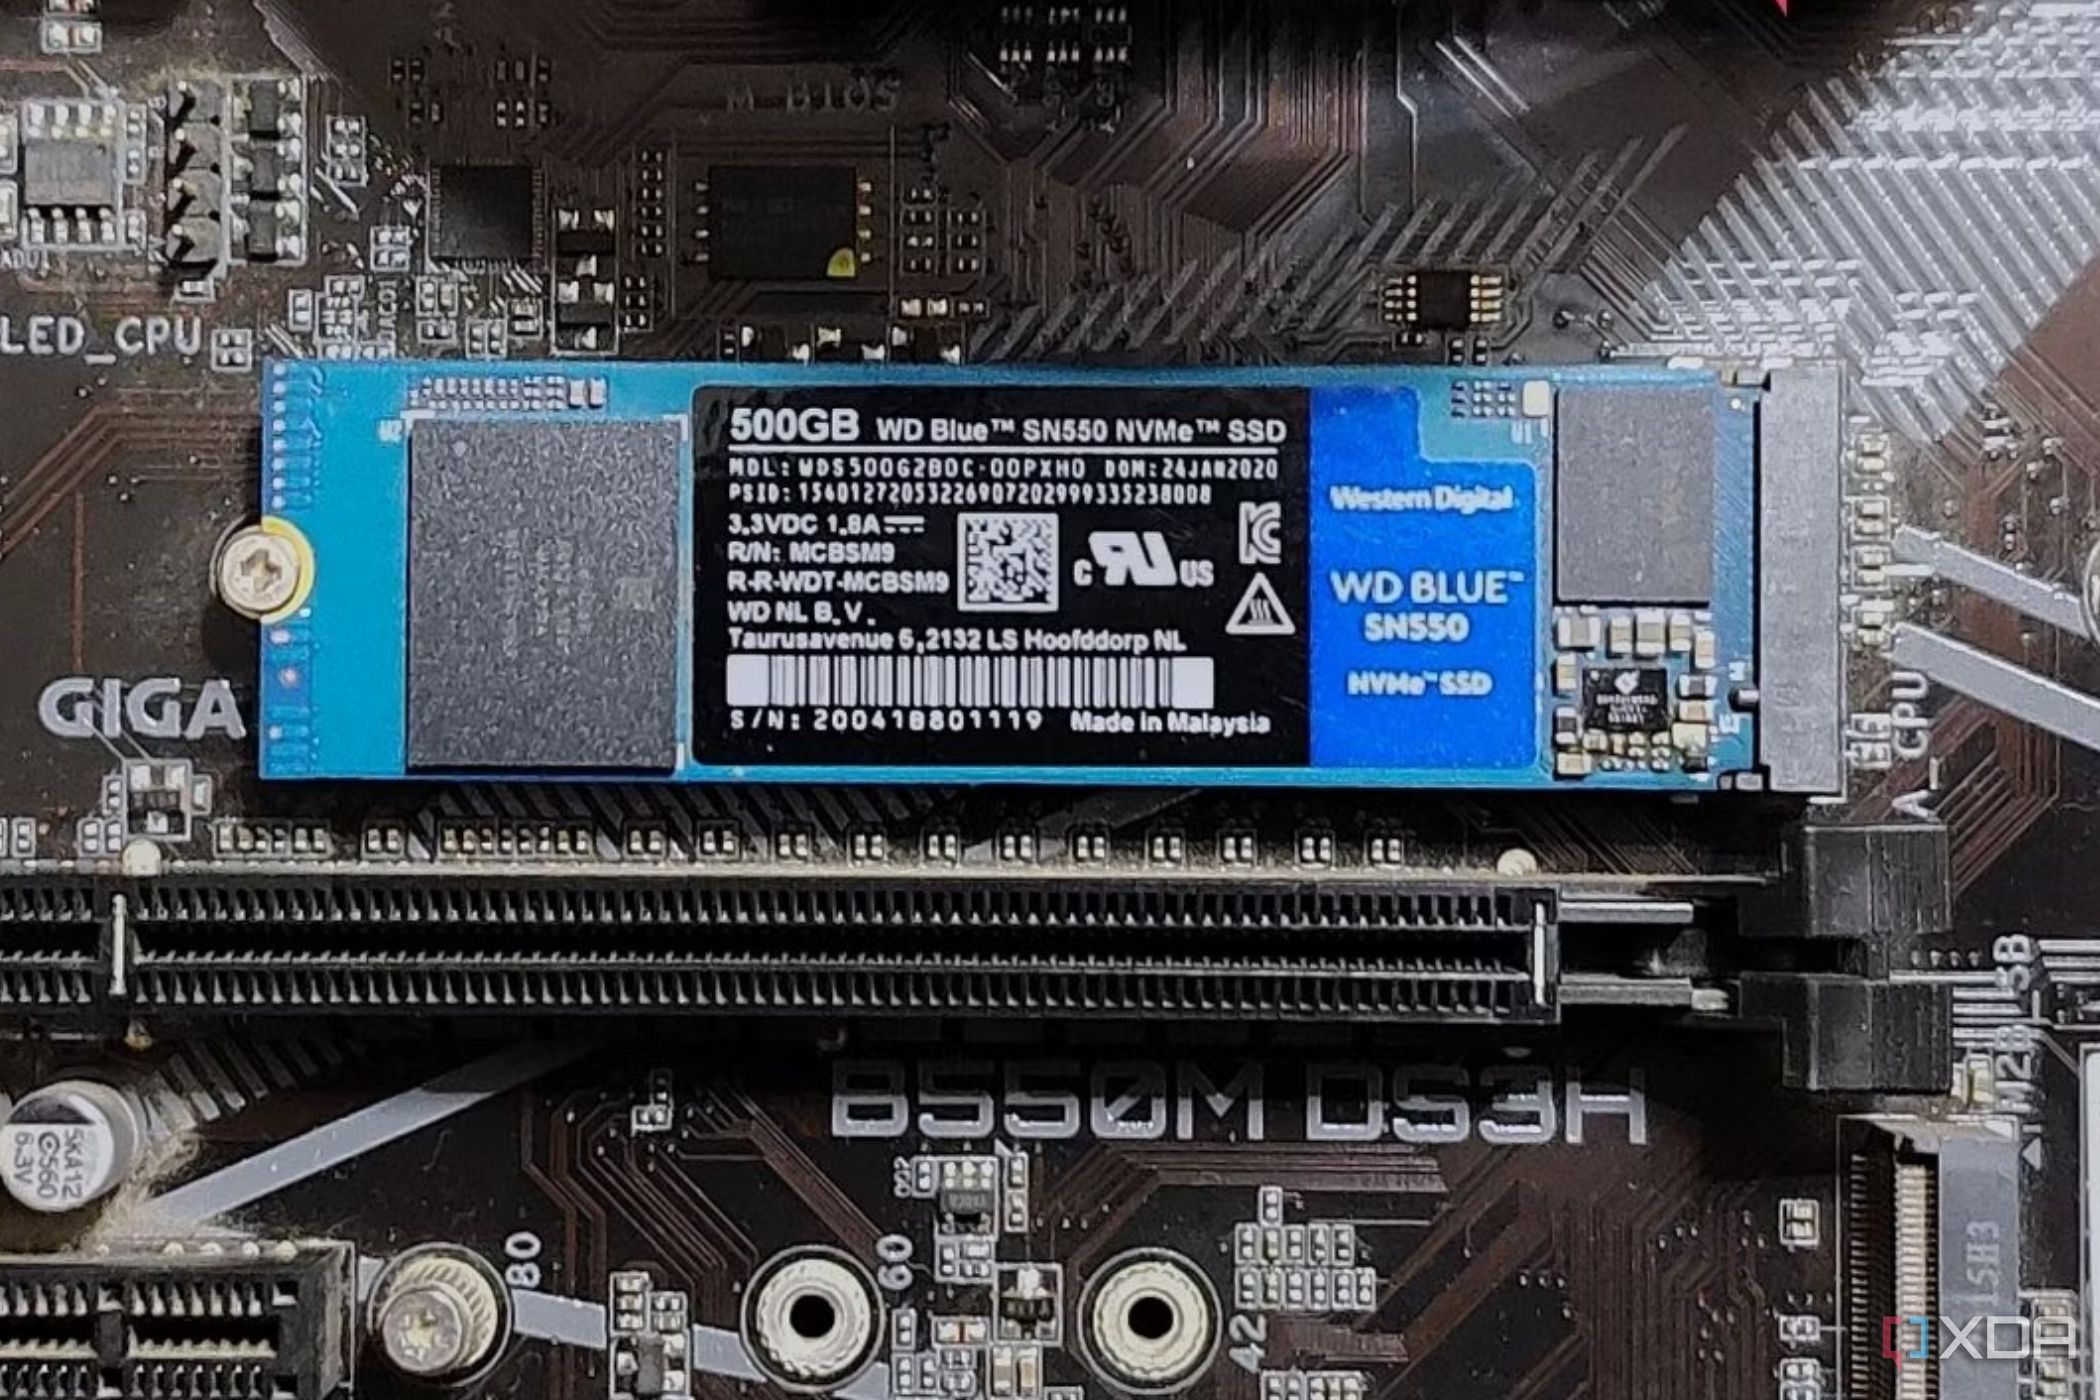 An image showing the WD Blue SN550 M.2 SSD installed on a motherboard.